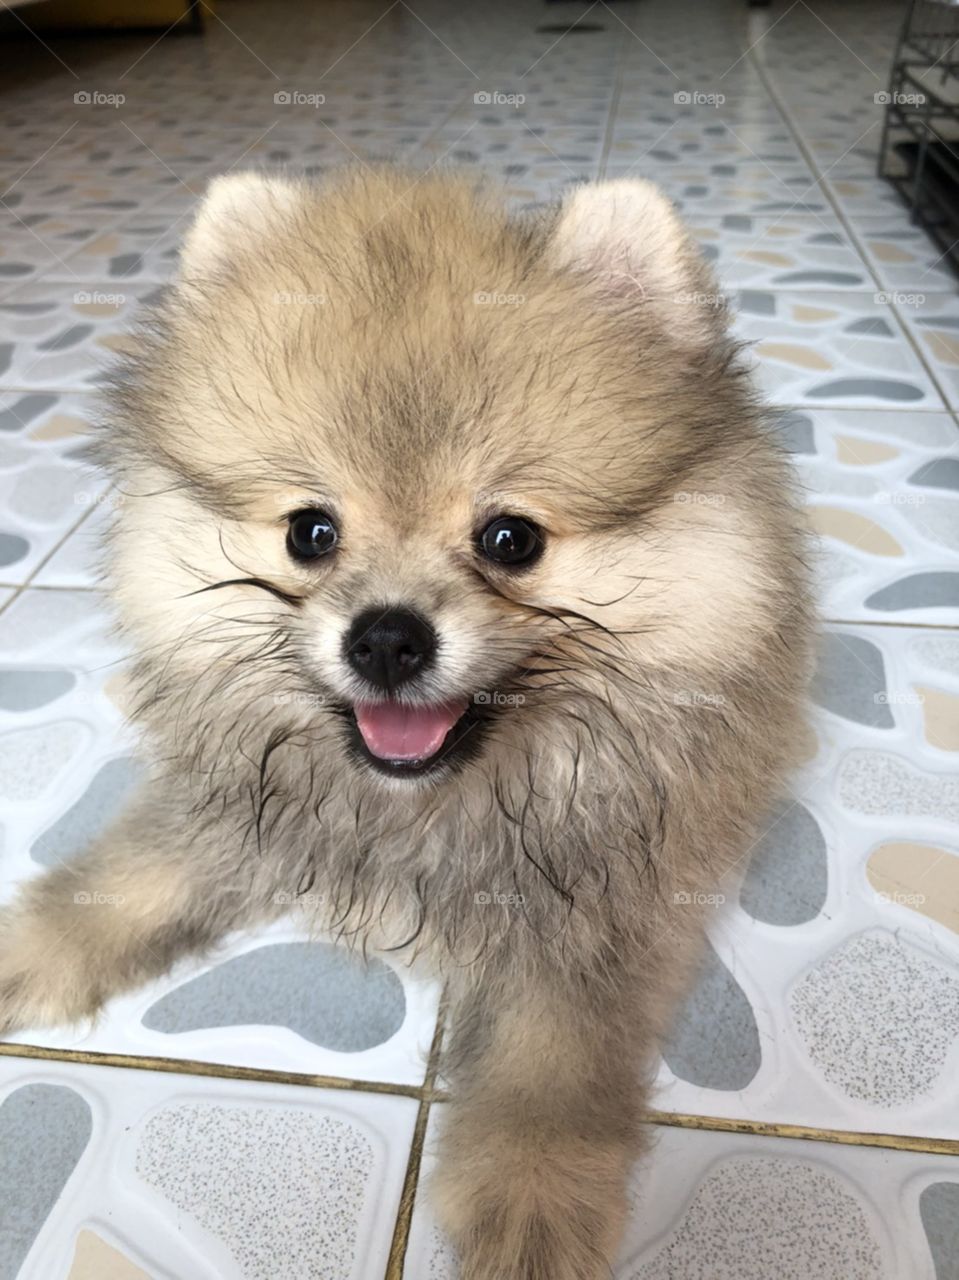 female puppy "pomeranian" is supicious at camera on mobile phone.